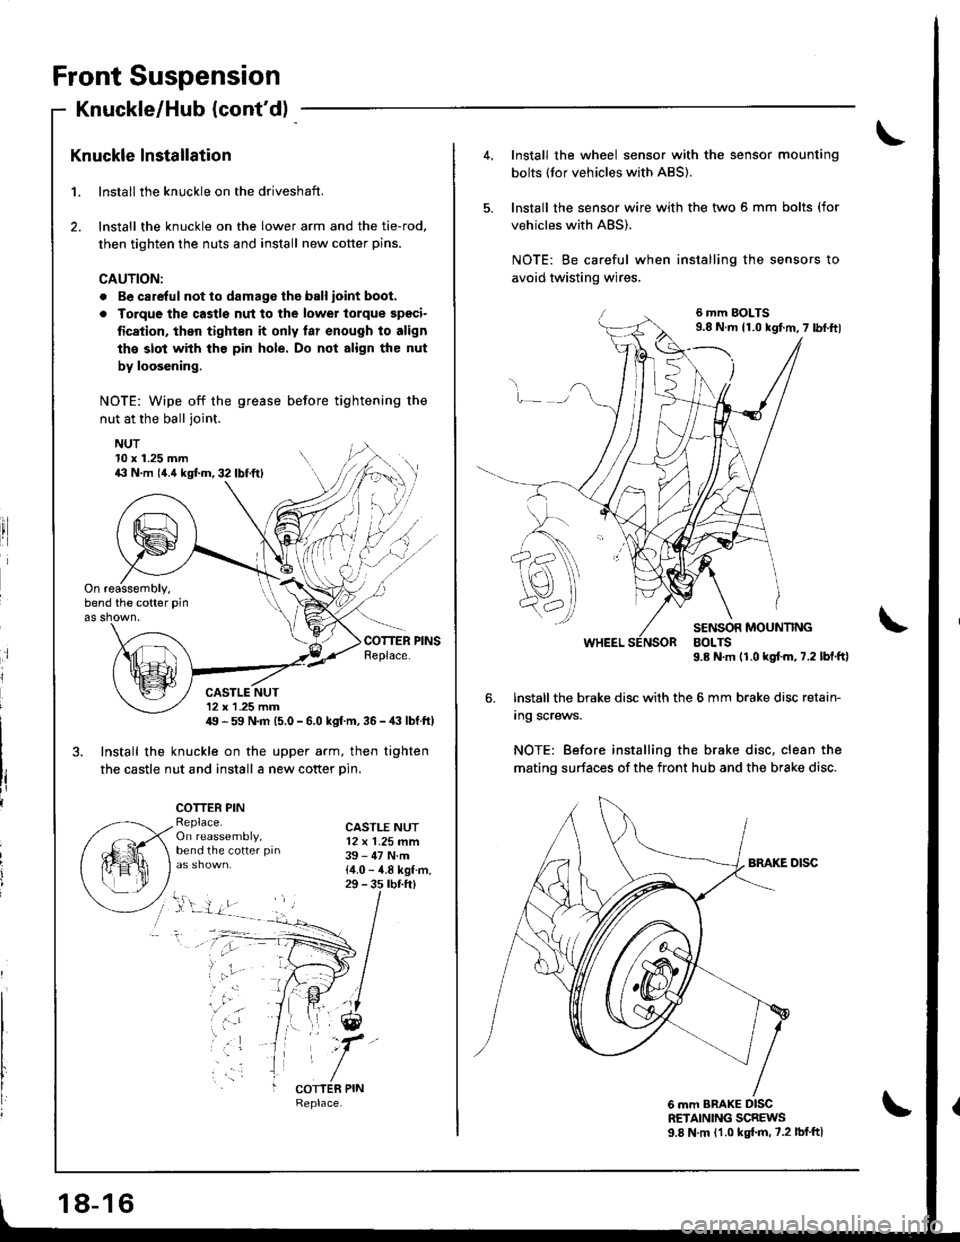 HONDA INTEGRA 1998 4.G Workshop Manual Front Suspension
Knuckle/Hub (contd)
Knuckle lnstallation
1. lnstall the knuckle on the driveshaft.
2. lnstall the knuckle on the lower arm and the tie-rod,
then tighten the nuts and install new cott